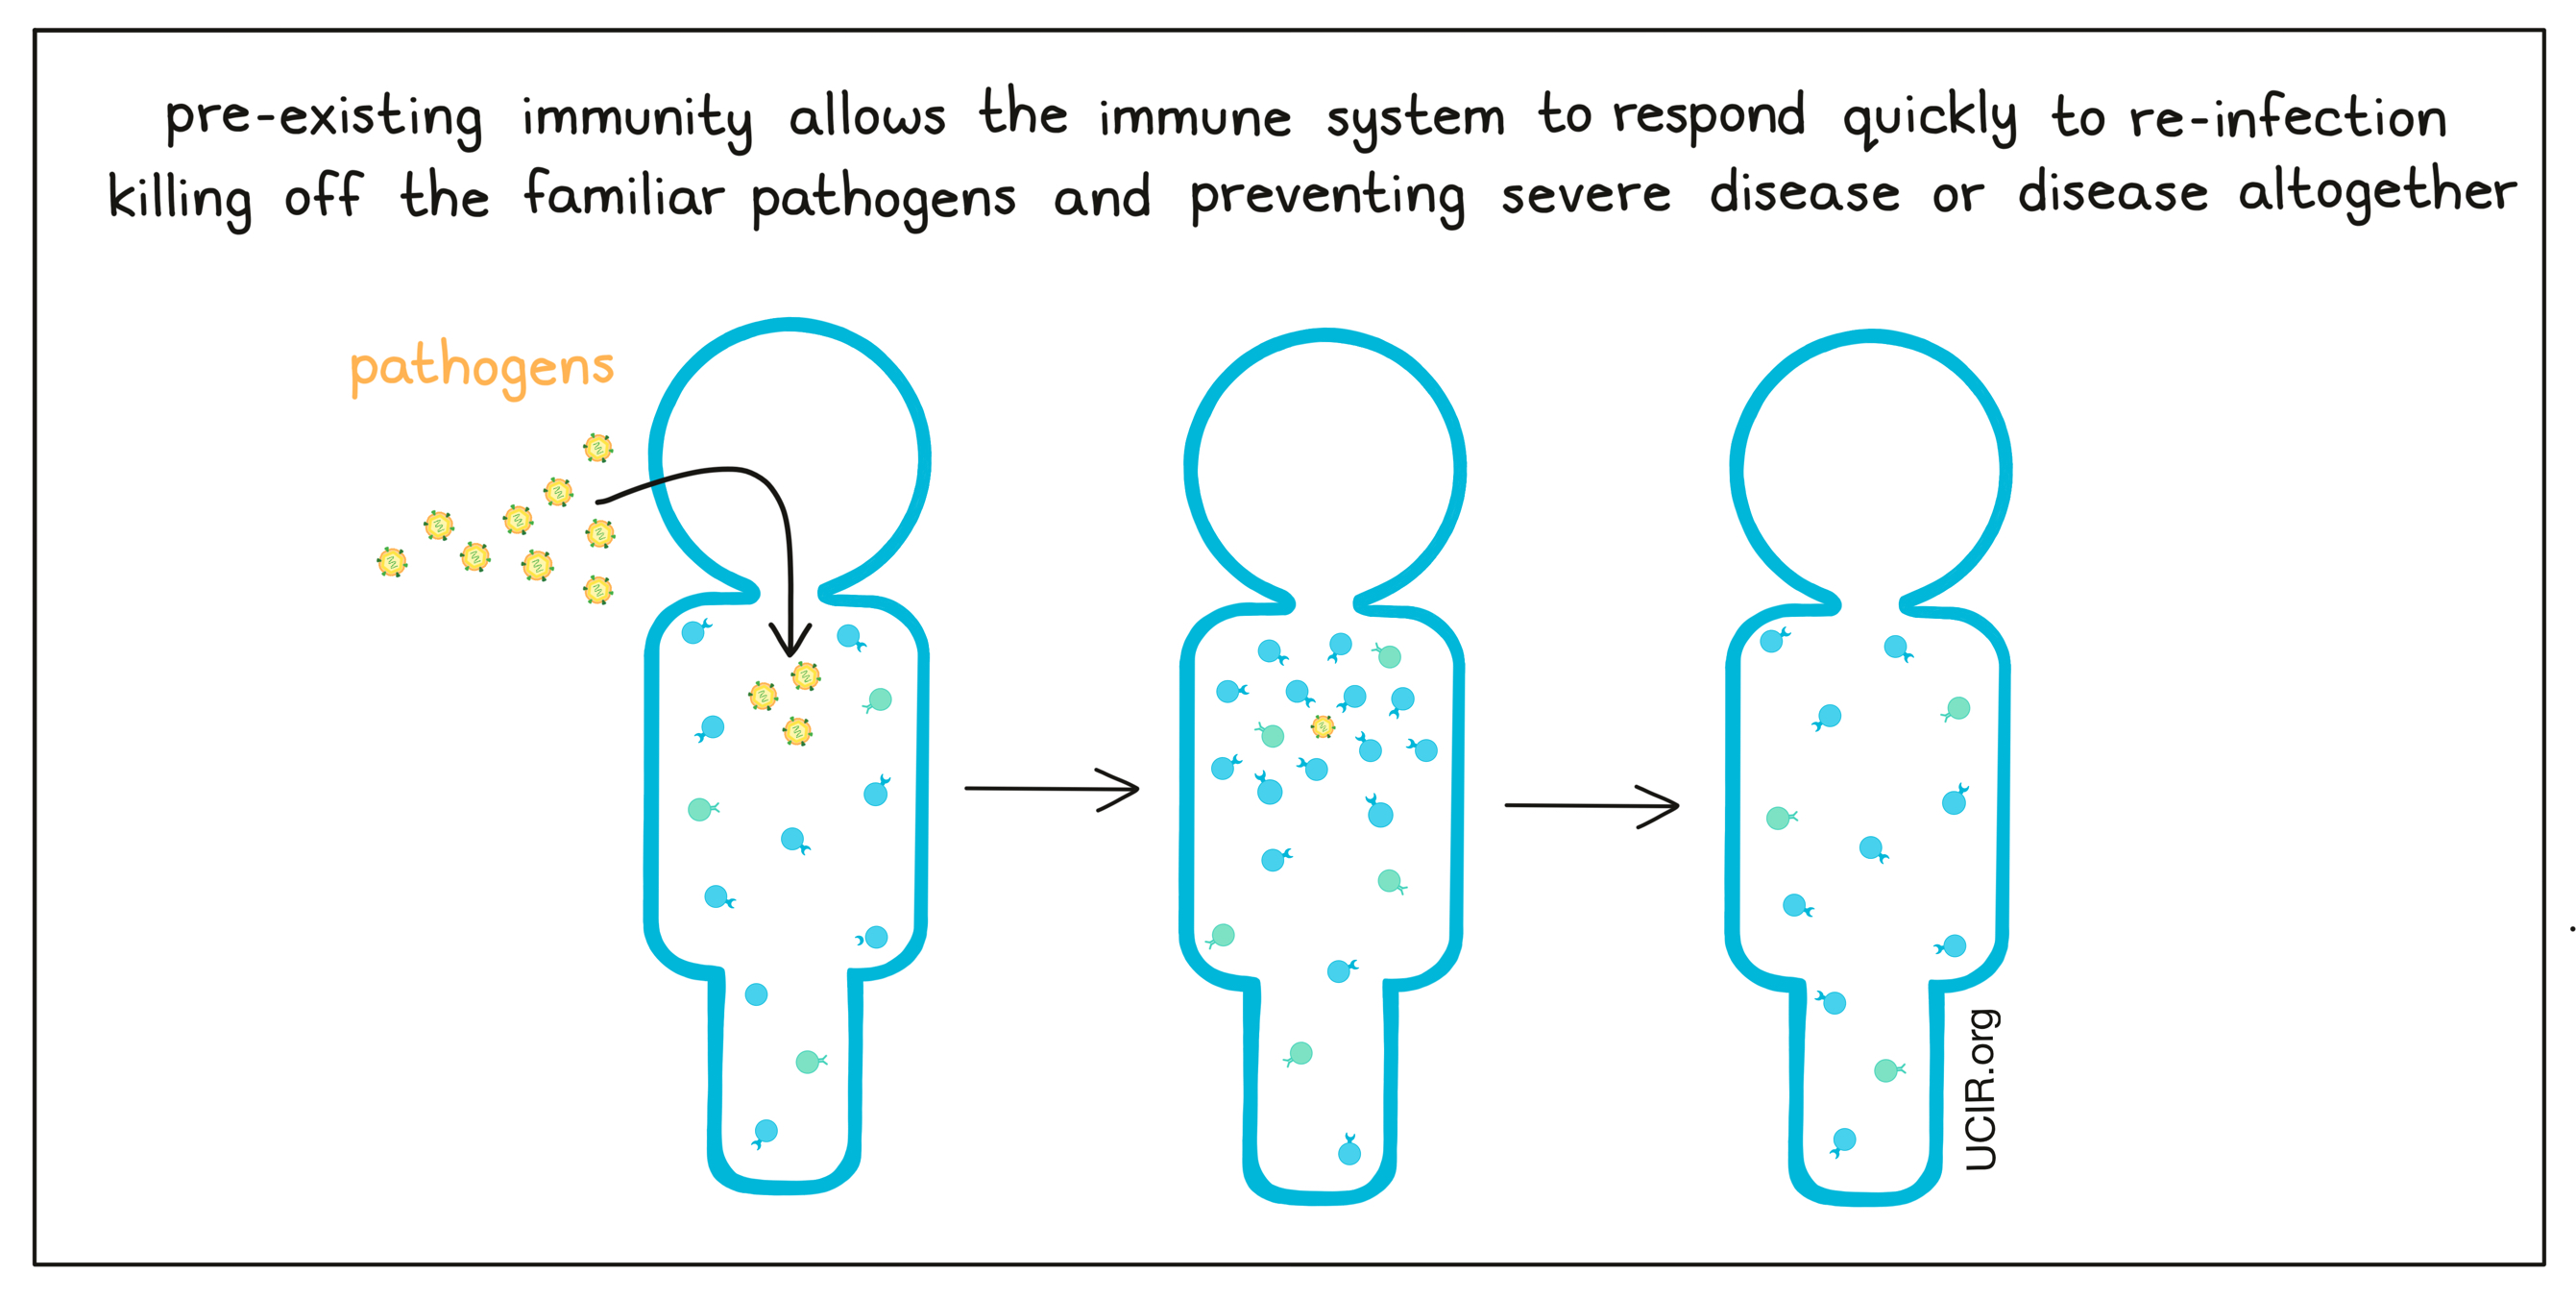 Pre-existing immunity allows the immune system to respond quickly to re-infection